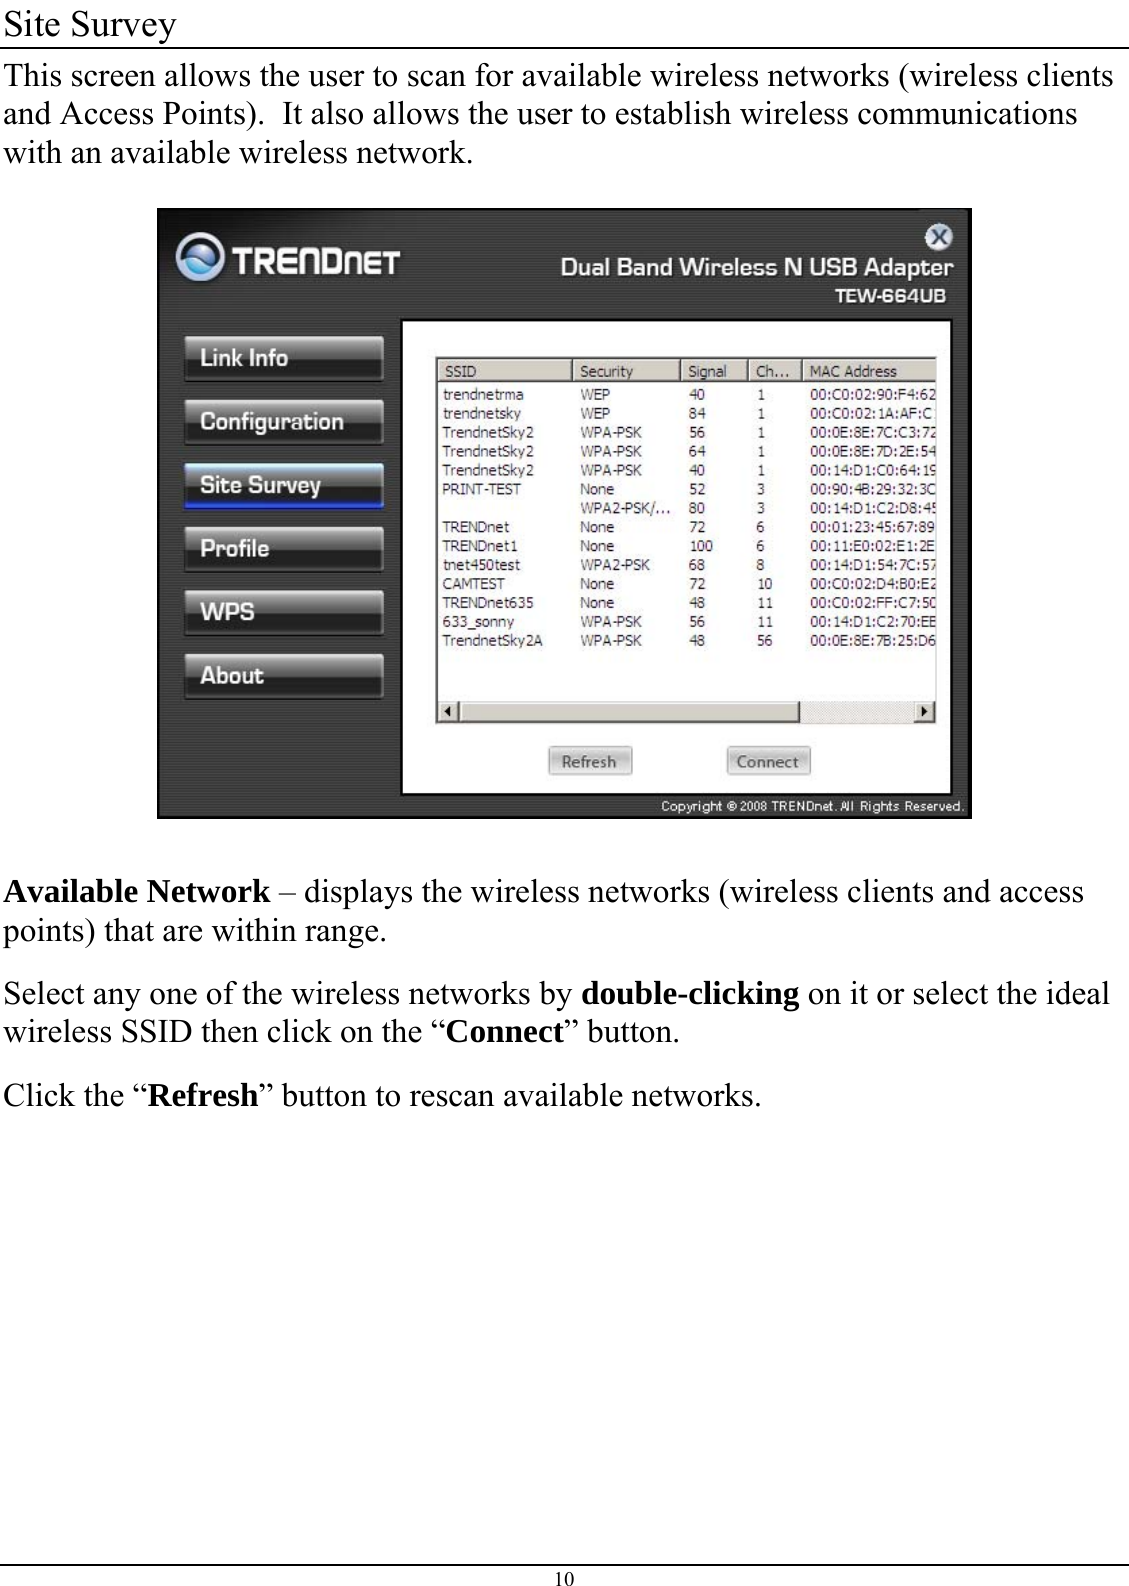 Site Survey This screen allows the user to scan for available wireless networks (wireless clients and Access Points).  It also allows the user to establish wireless communications with an available wireless network.    Available Network – displays the wireless networks (wireless clients and access points) that are within range.  Select any one of the wireless networks by double-clicking on it or select the ideal wireless SSID then click on the “Connect” button. Click the “Refresh” button to rescan available networks.      10 